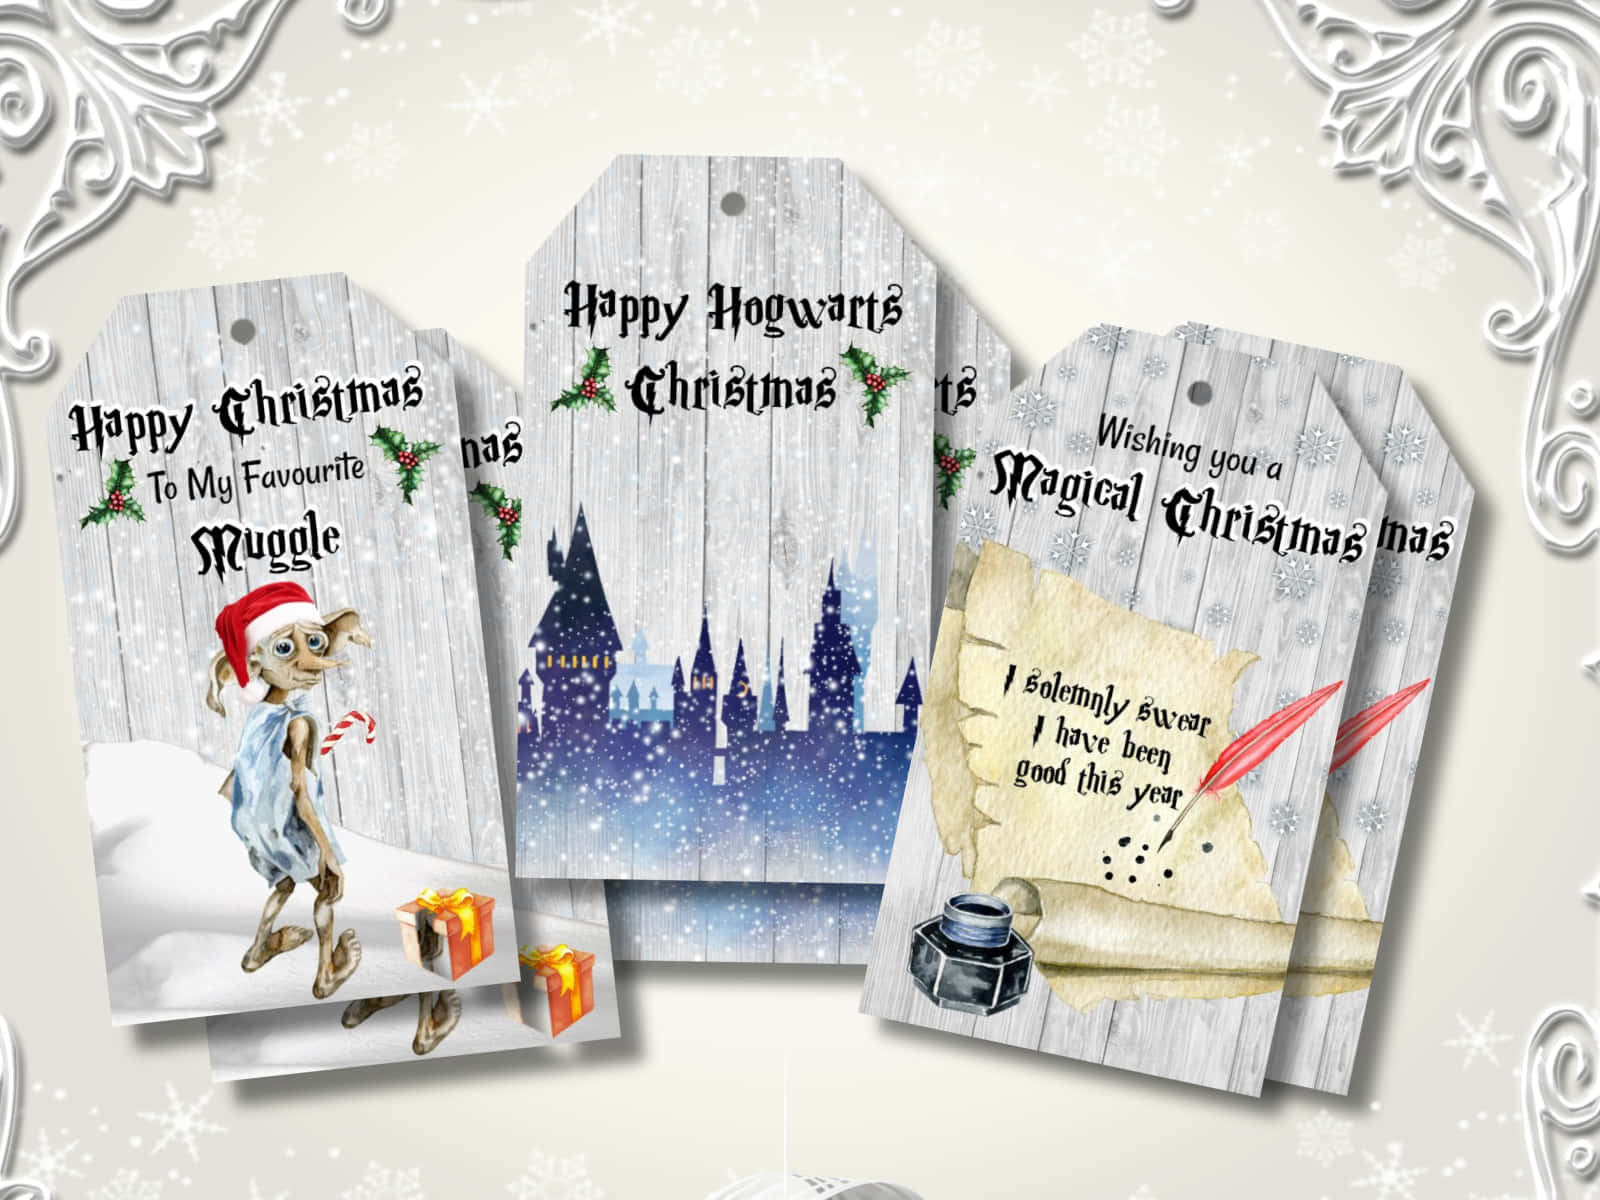 "Celebrating Christmas At Hogwarts School of Witchcraft and Wizardry" Wallpaper